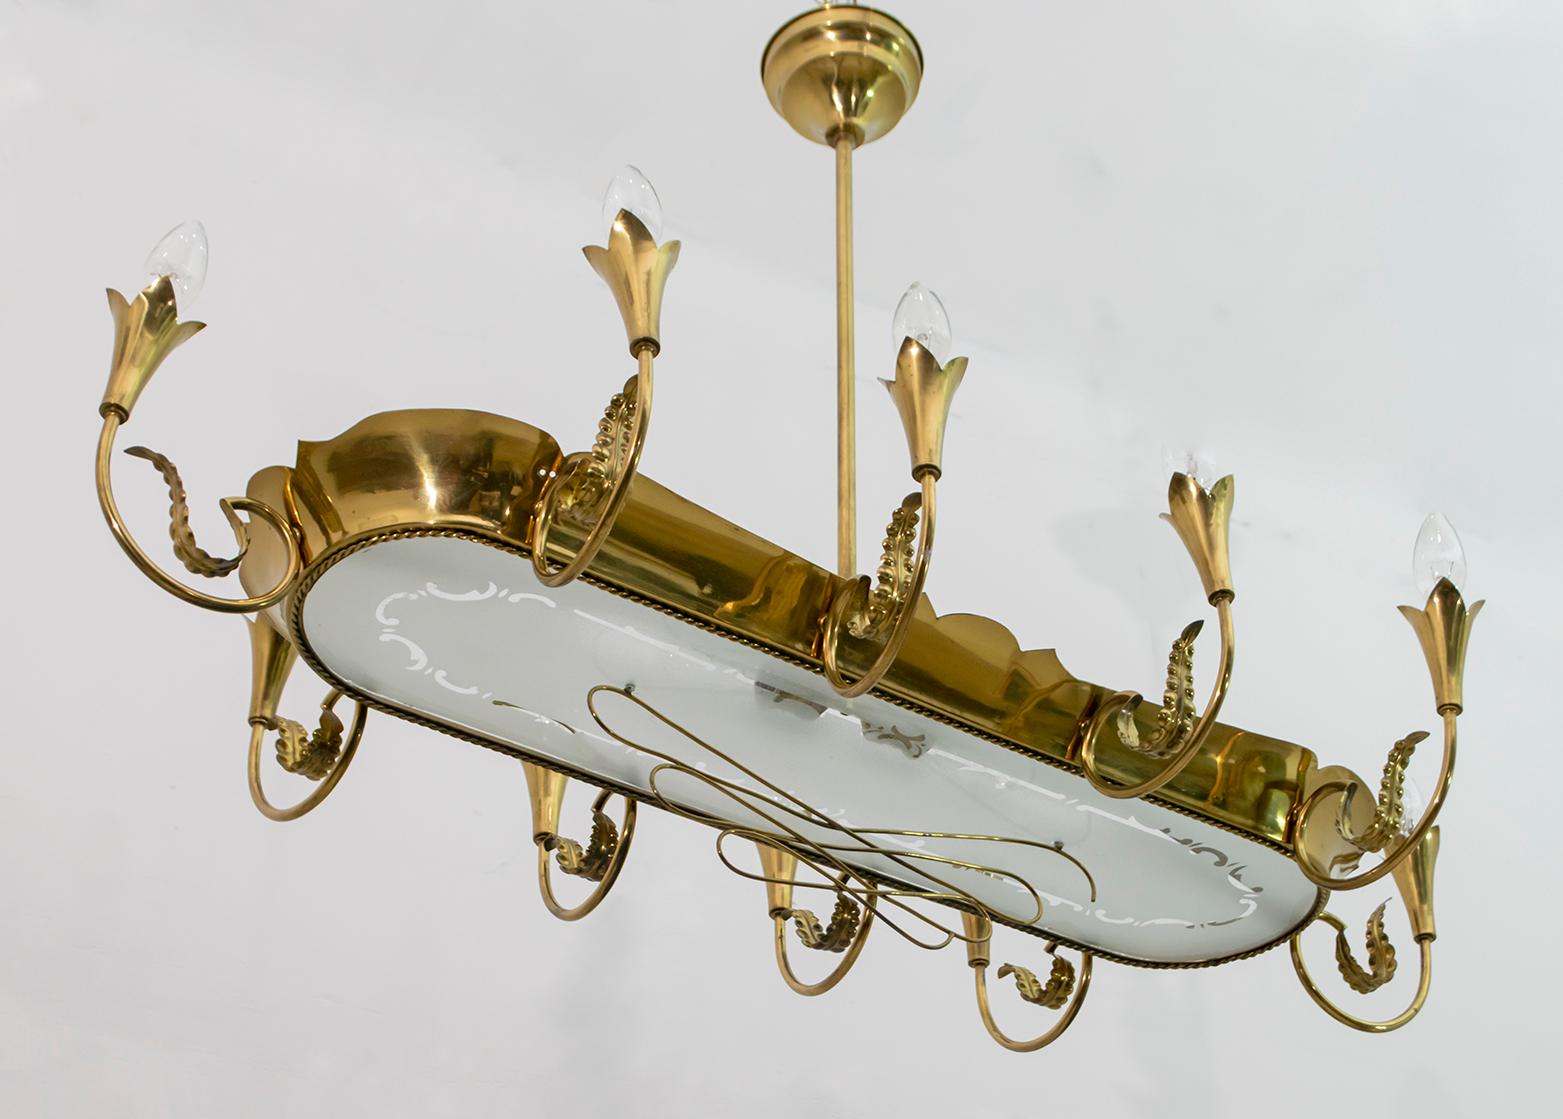 Refined chandelier attributed to Pietro Chiesa for Fontarte with 12 lights with brass support and accessory and a wonderful frosted glass with decoration. Italy in the 1940s.